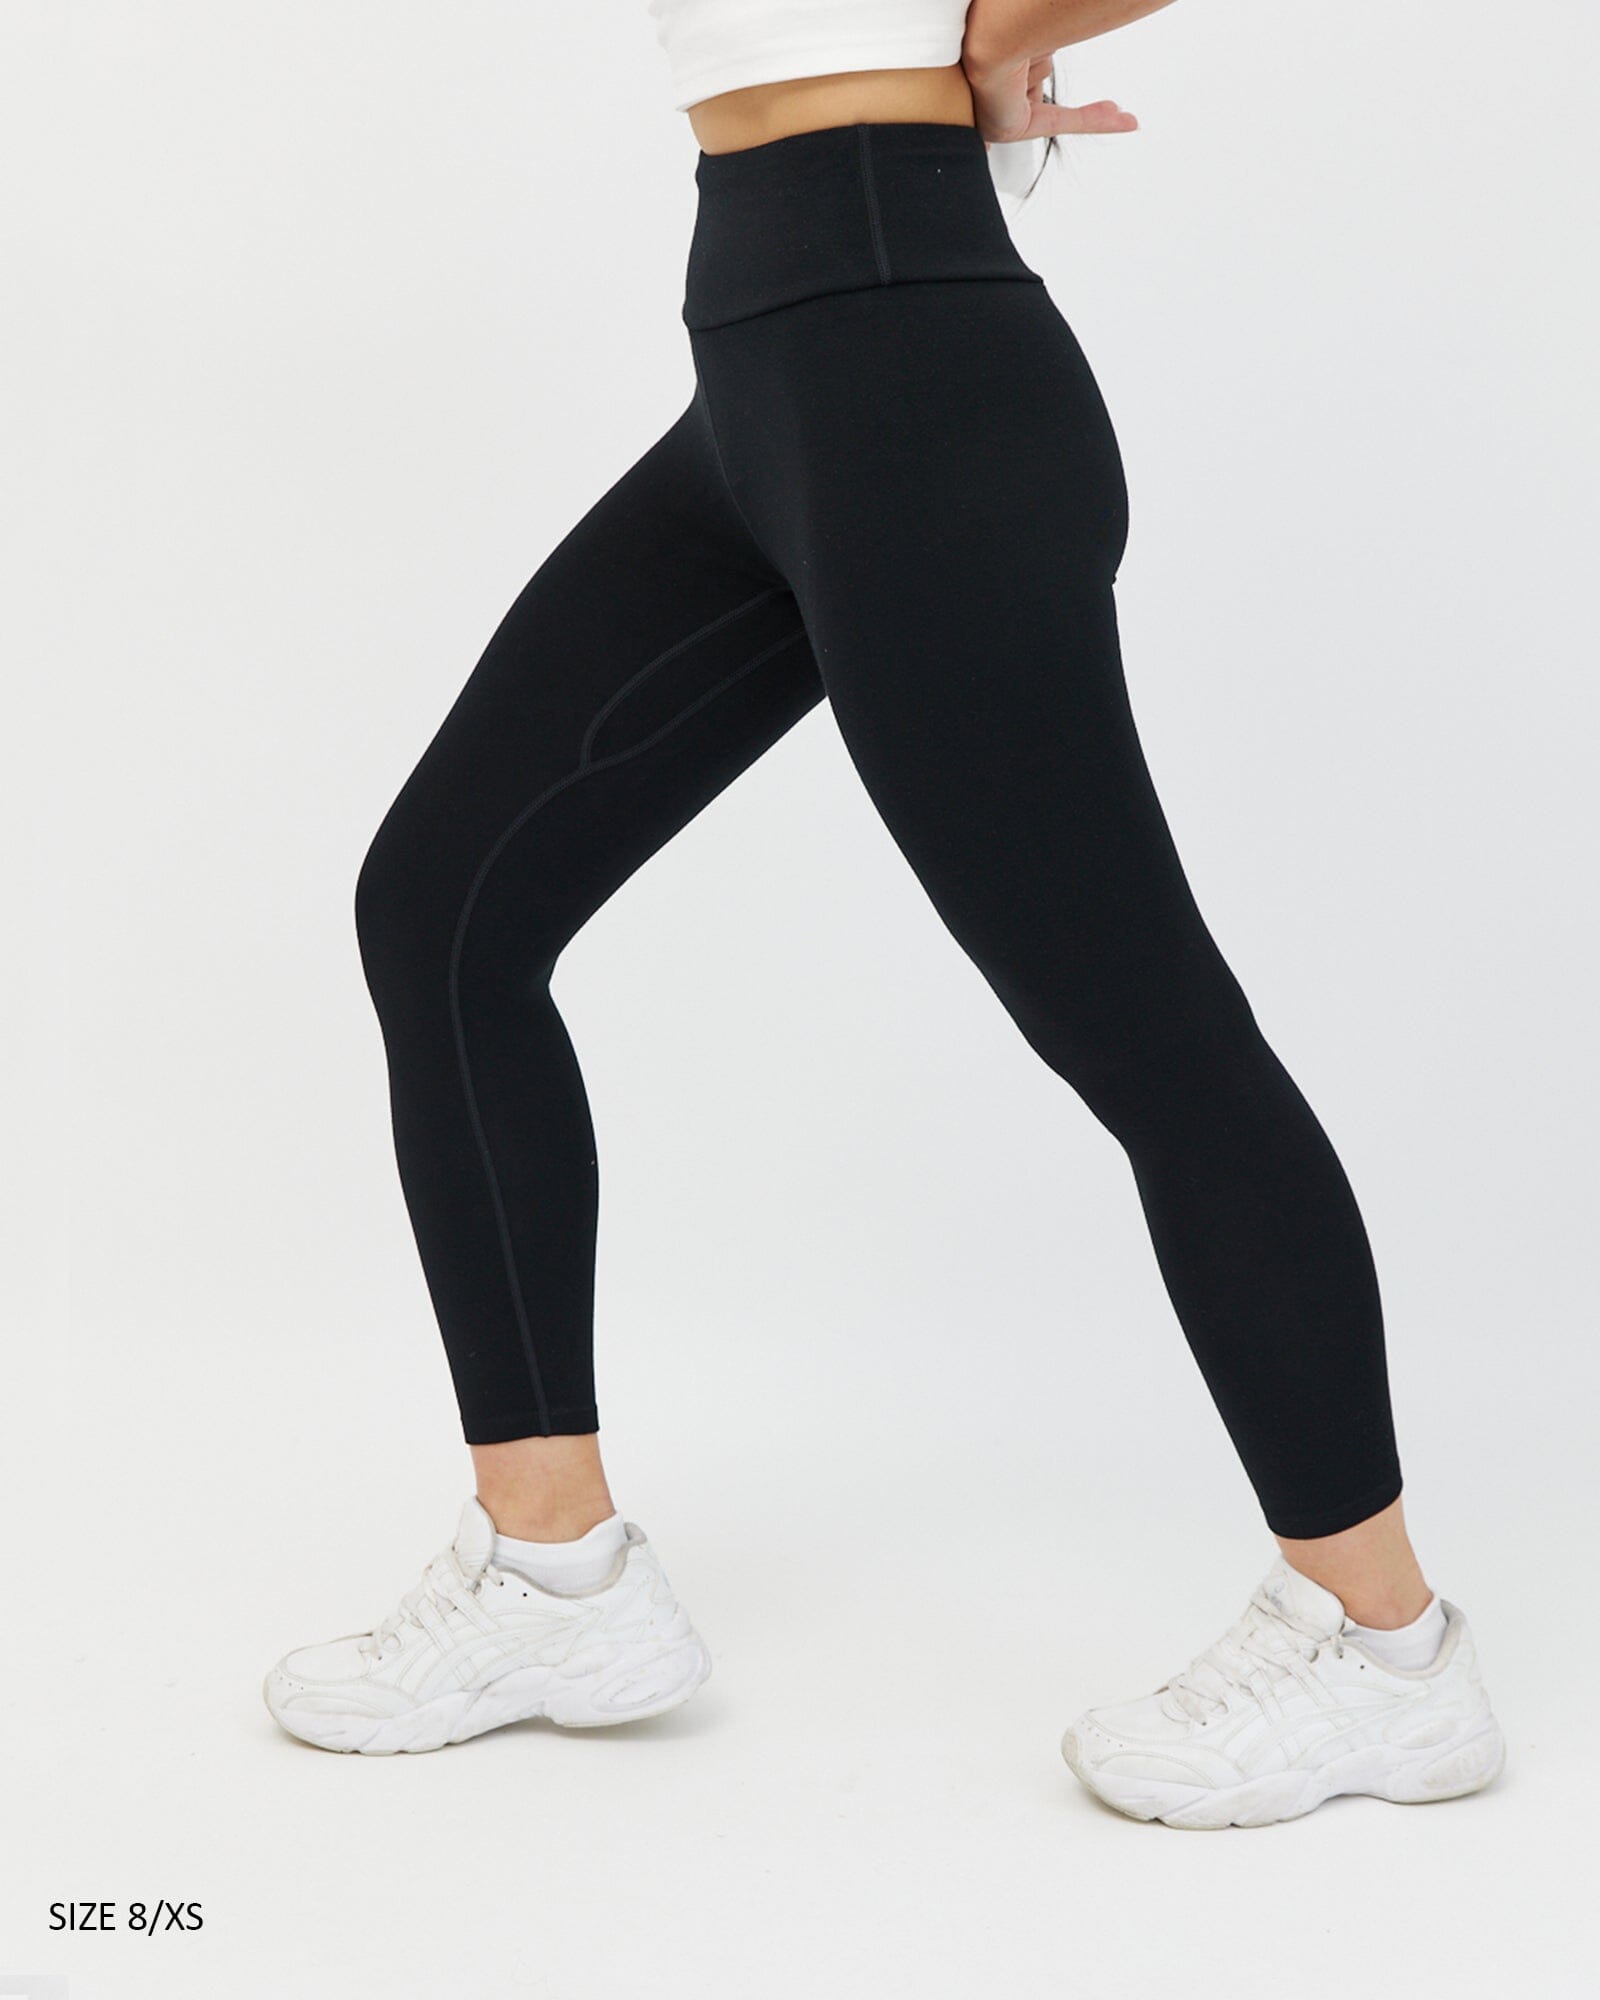 The ultimate comfy leggings - CROPPED - Avila the label